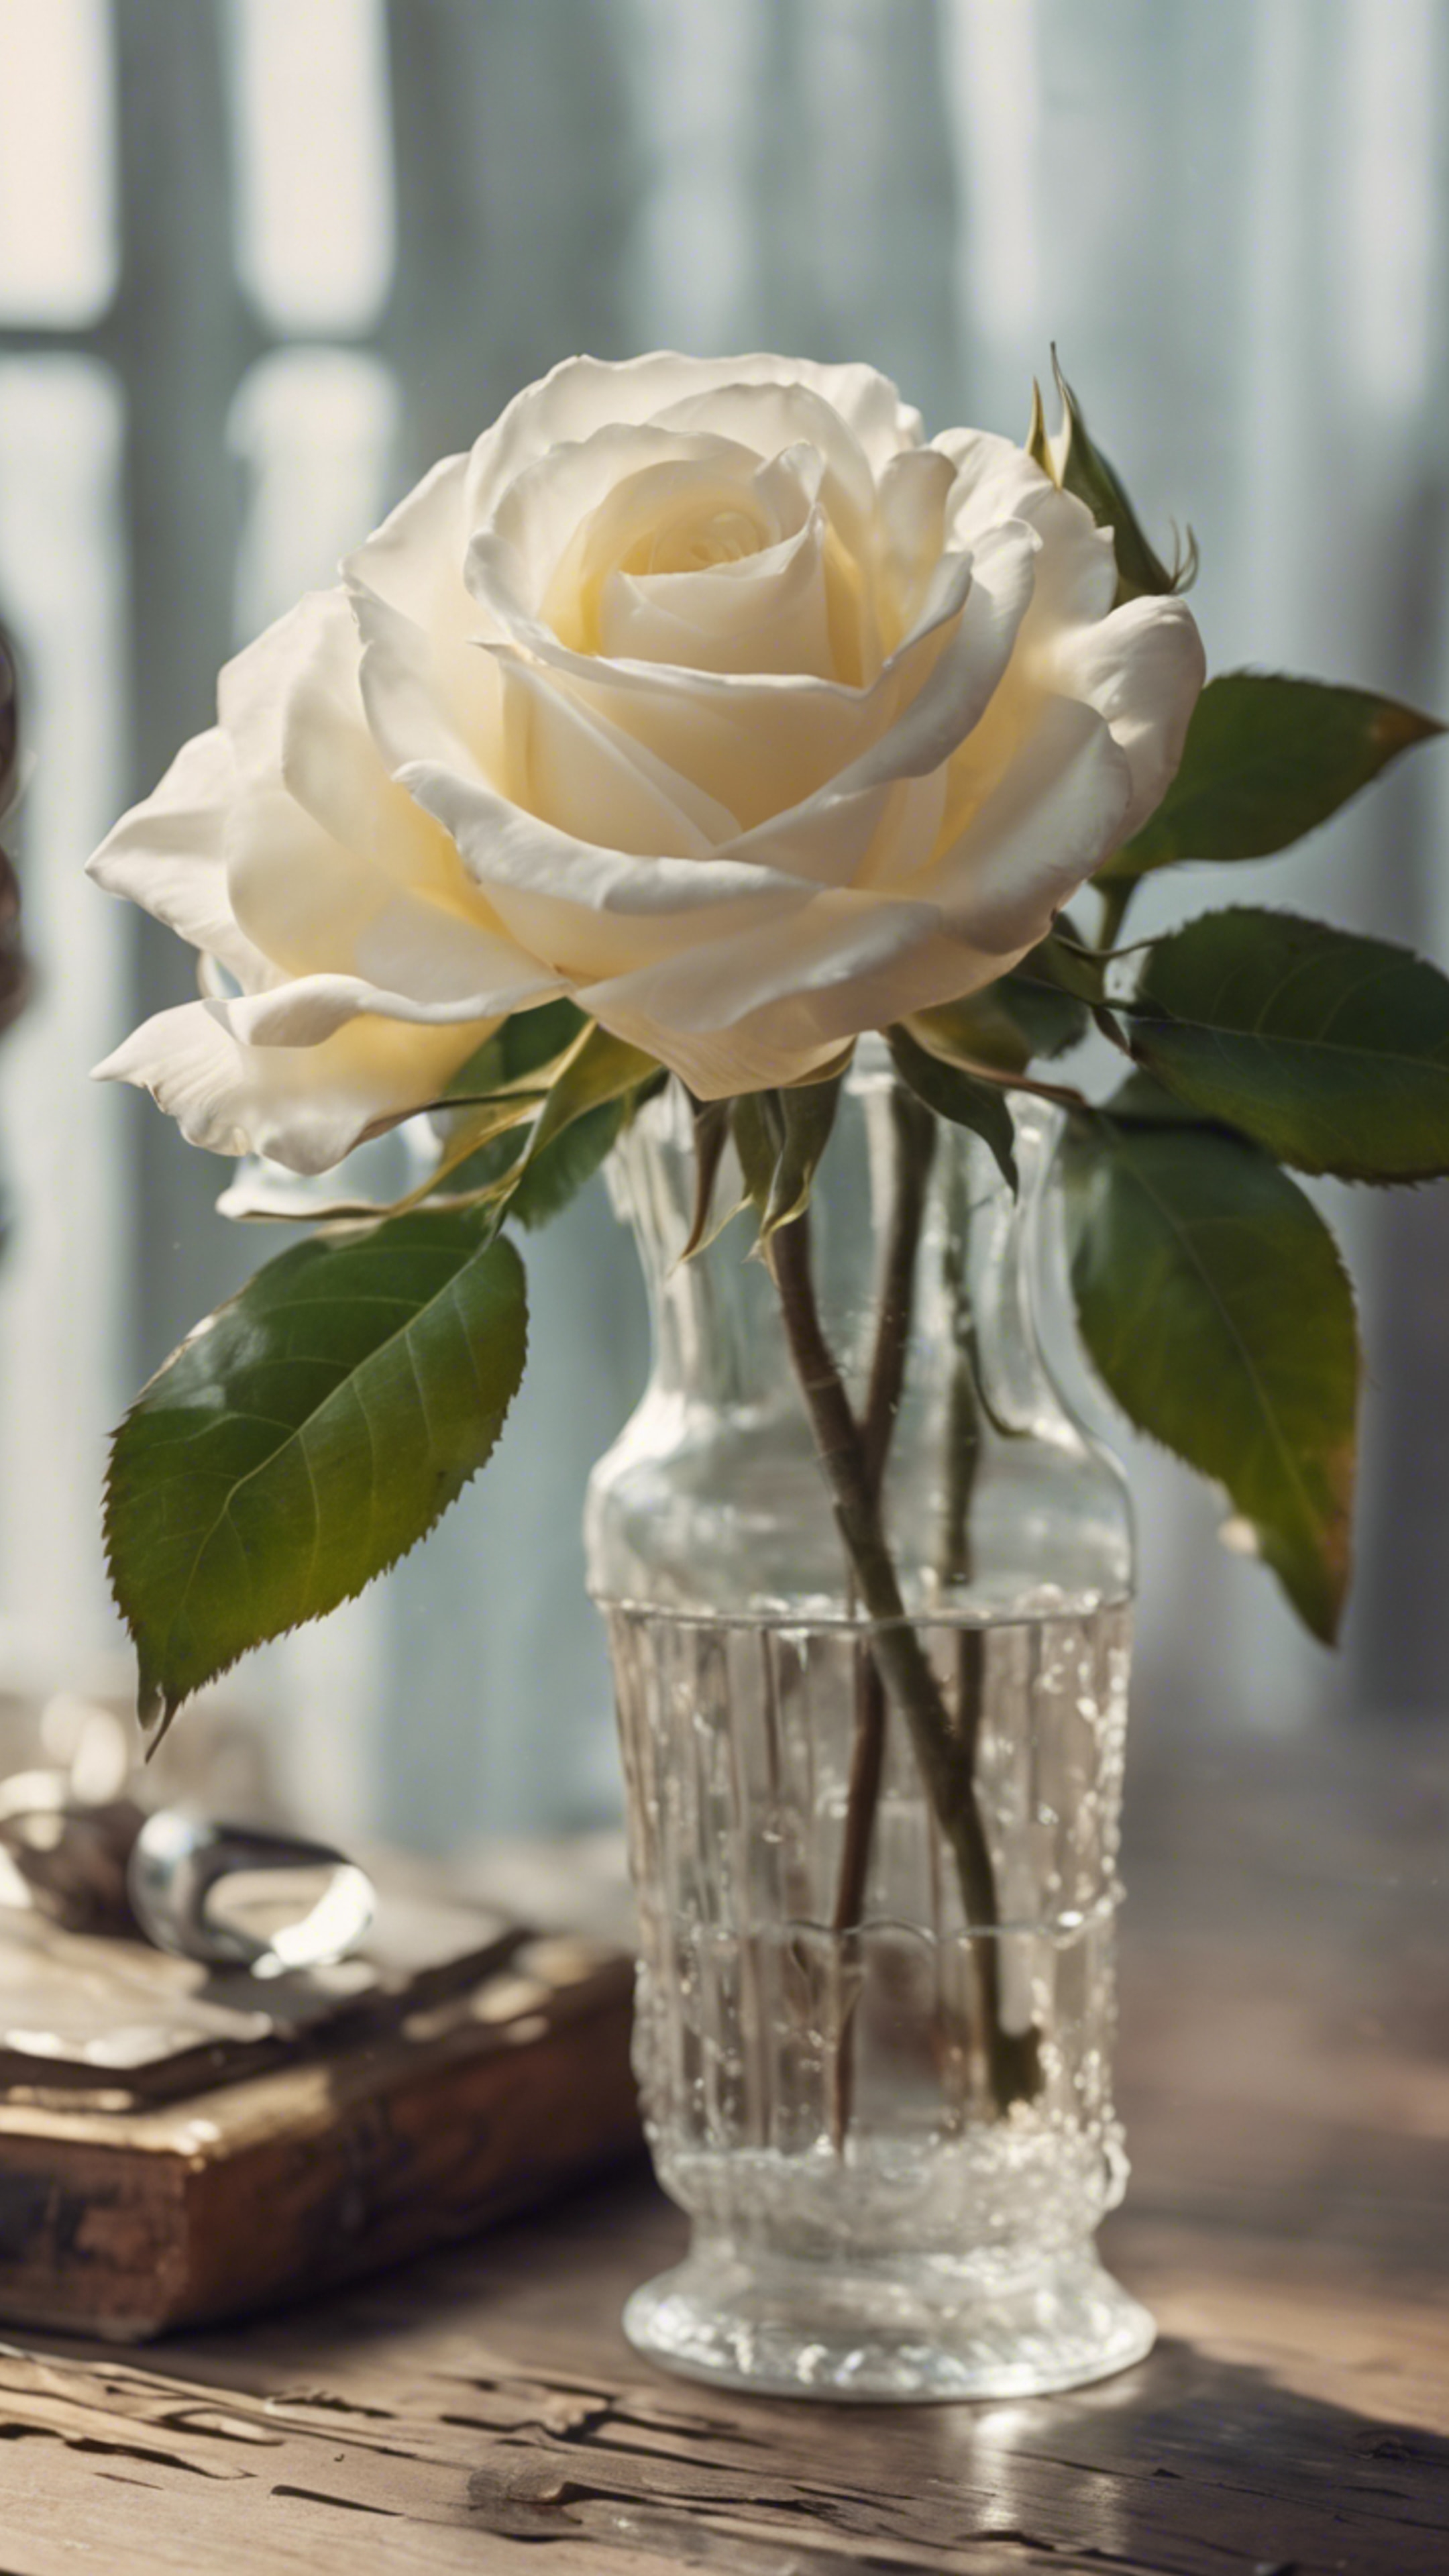 A soft white rose in a vintage glass vase on an antique wooden table. Tapet[fc4486b9e2ee4669bbfe]